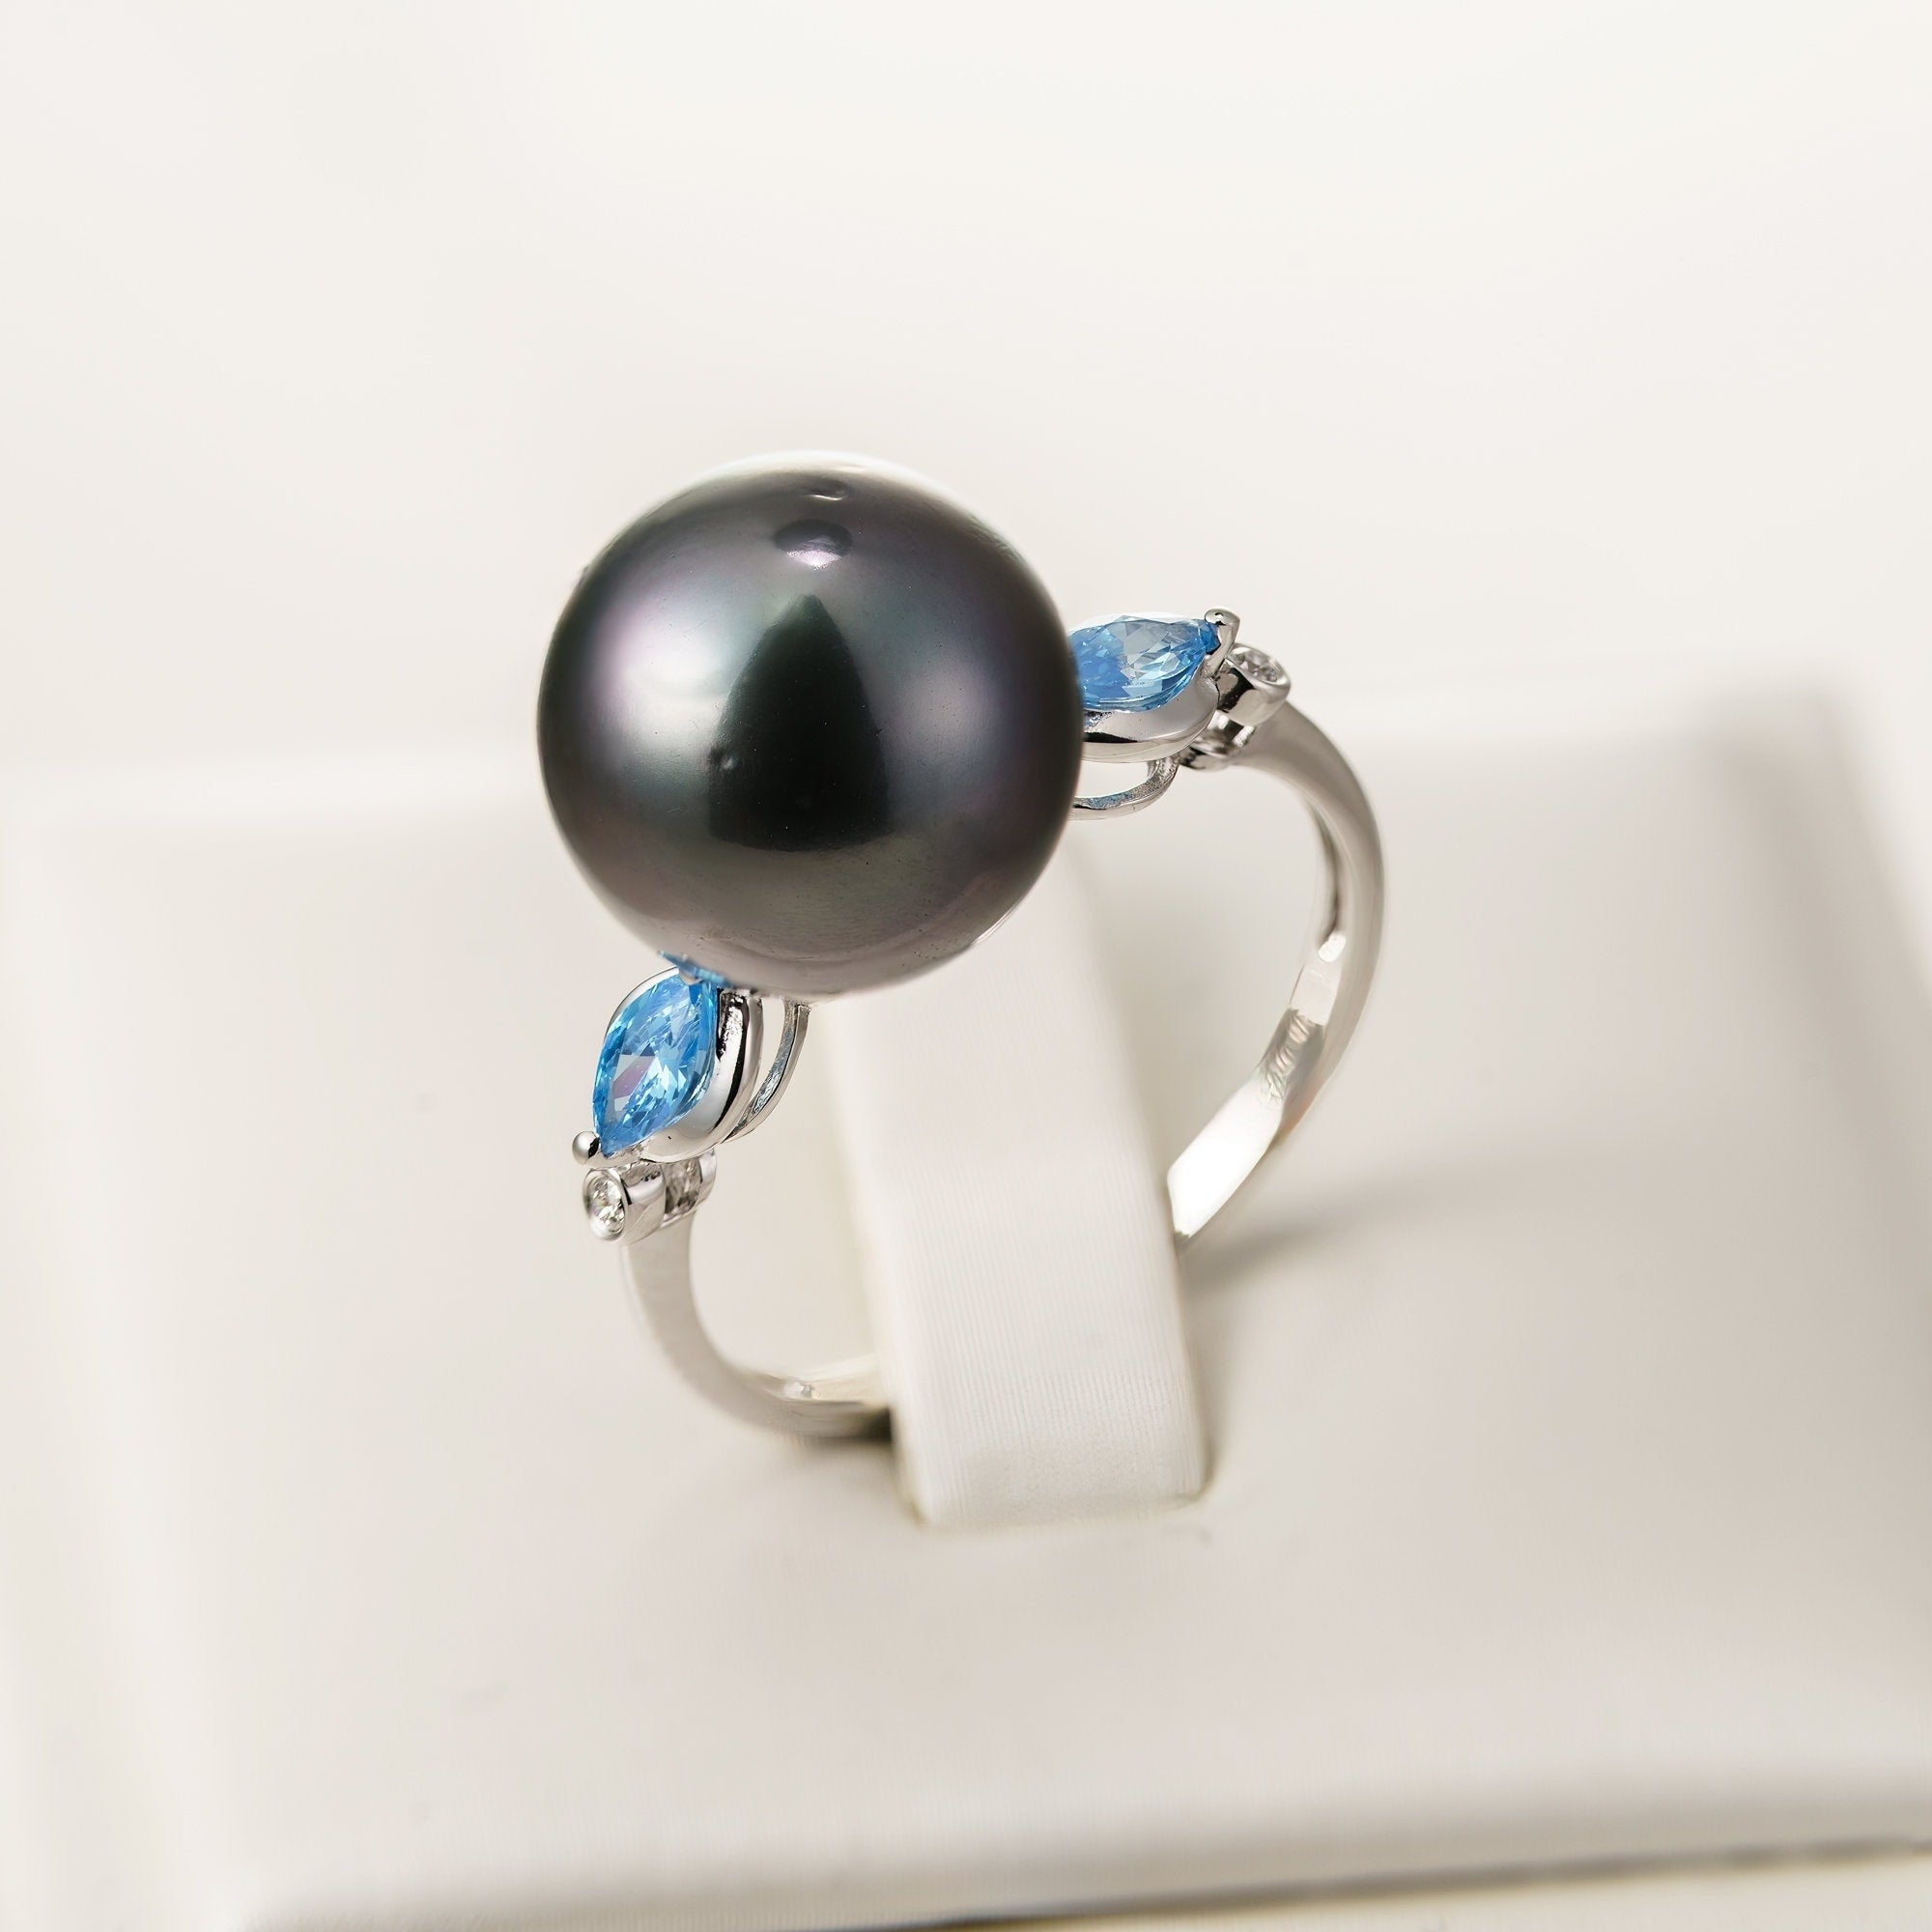 12mm tahitian pearl ring, size 7.5 us, 925 sterling silver with cubic zirconia